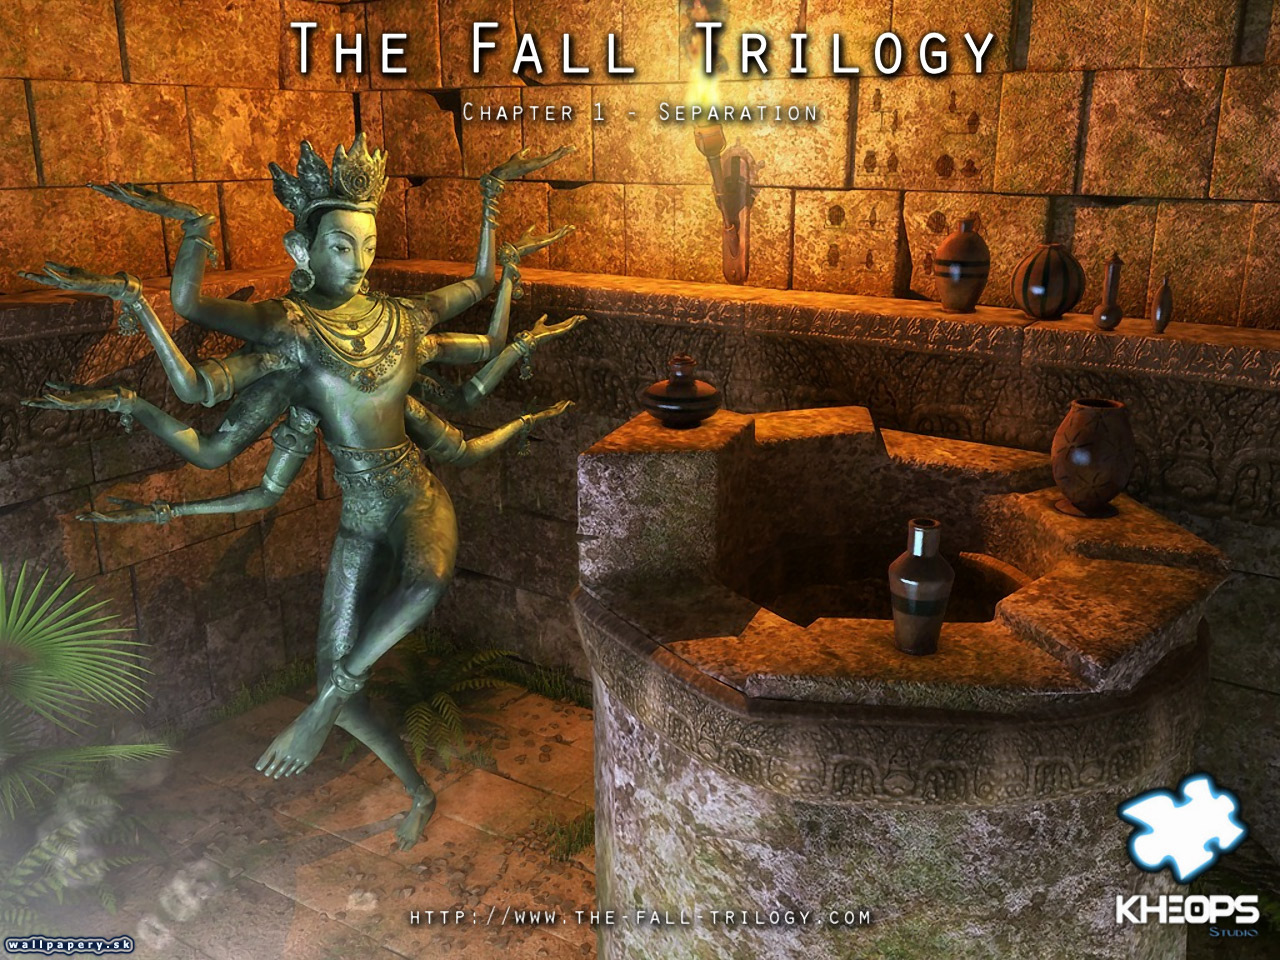 The Fall Trilogy - Chapter 1: Separation - wallpaper 12